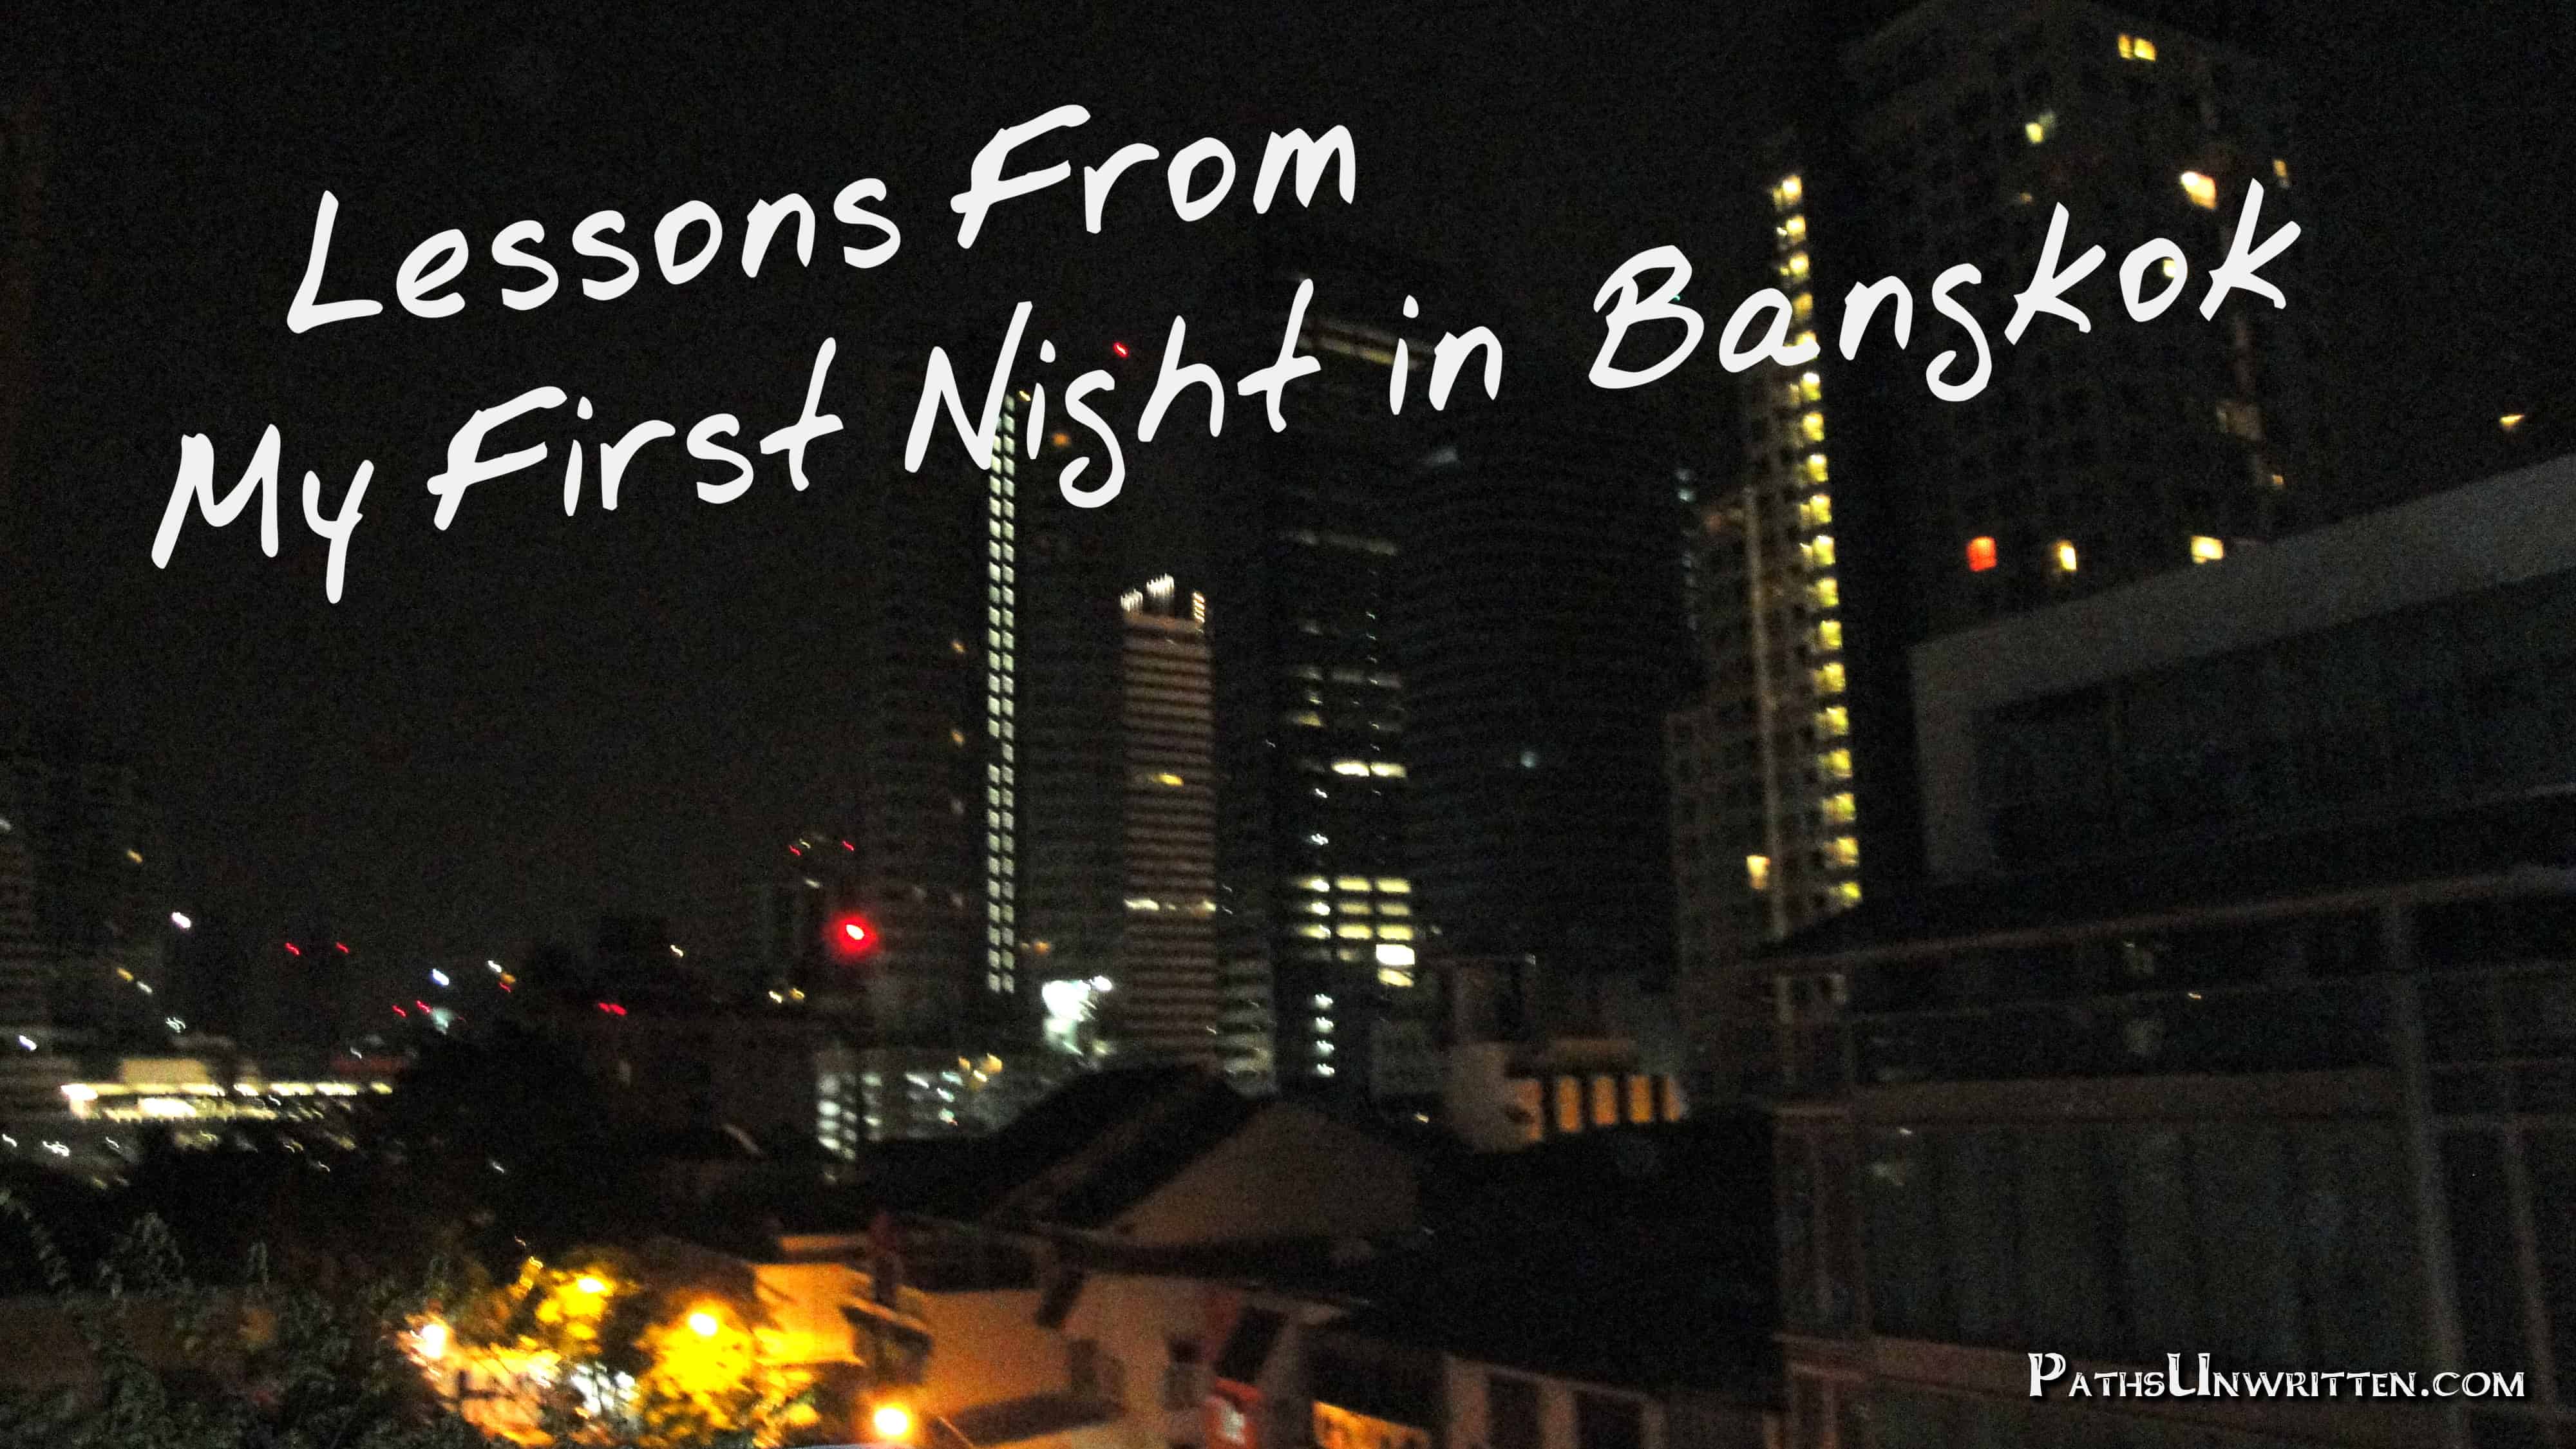 Lessons From My First Night in Bangkok.